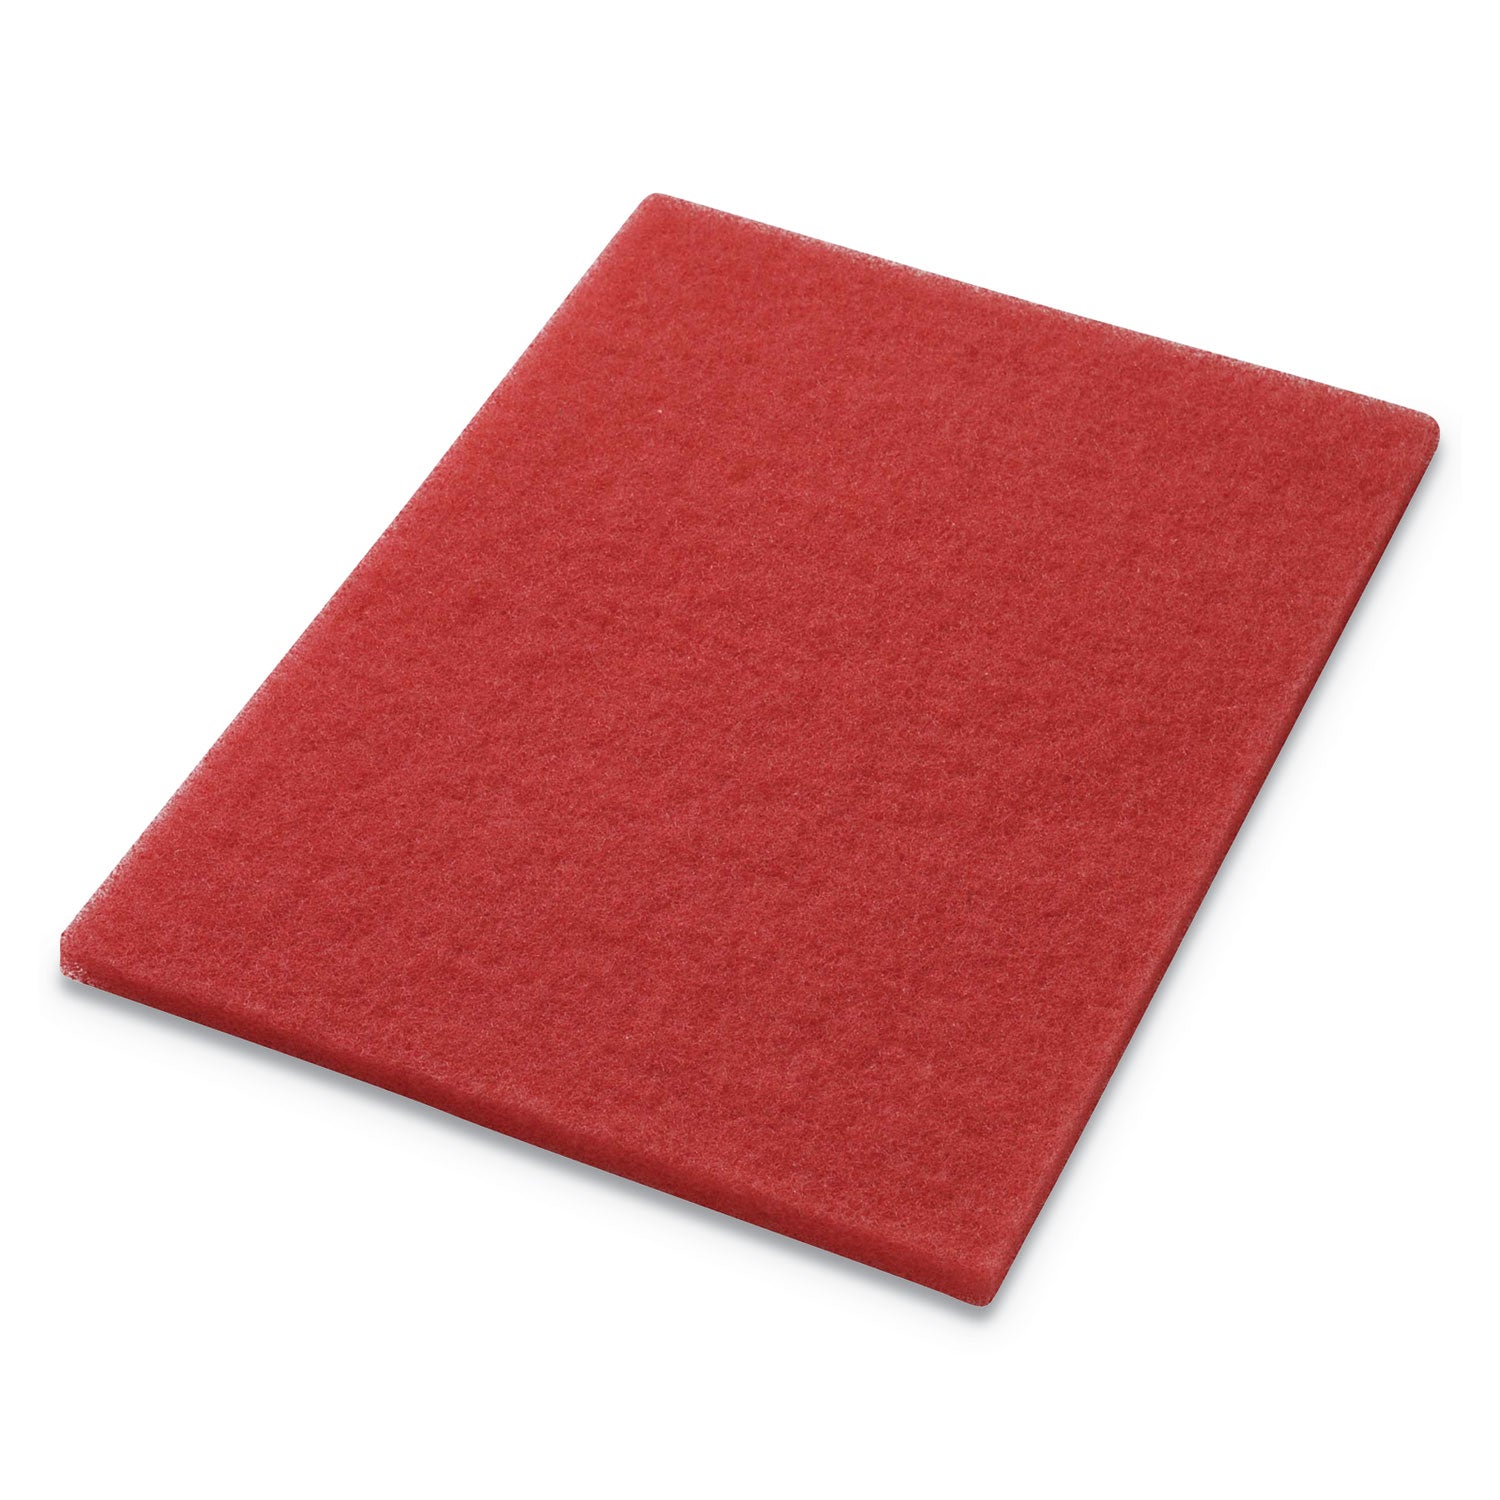 buffing-pads-28-x-14-red-5-carton_amf40441428 - 1